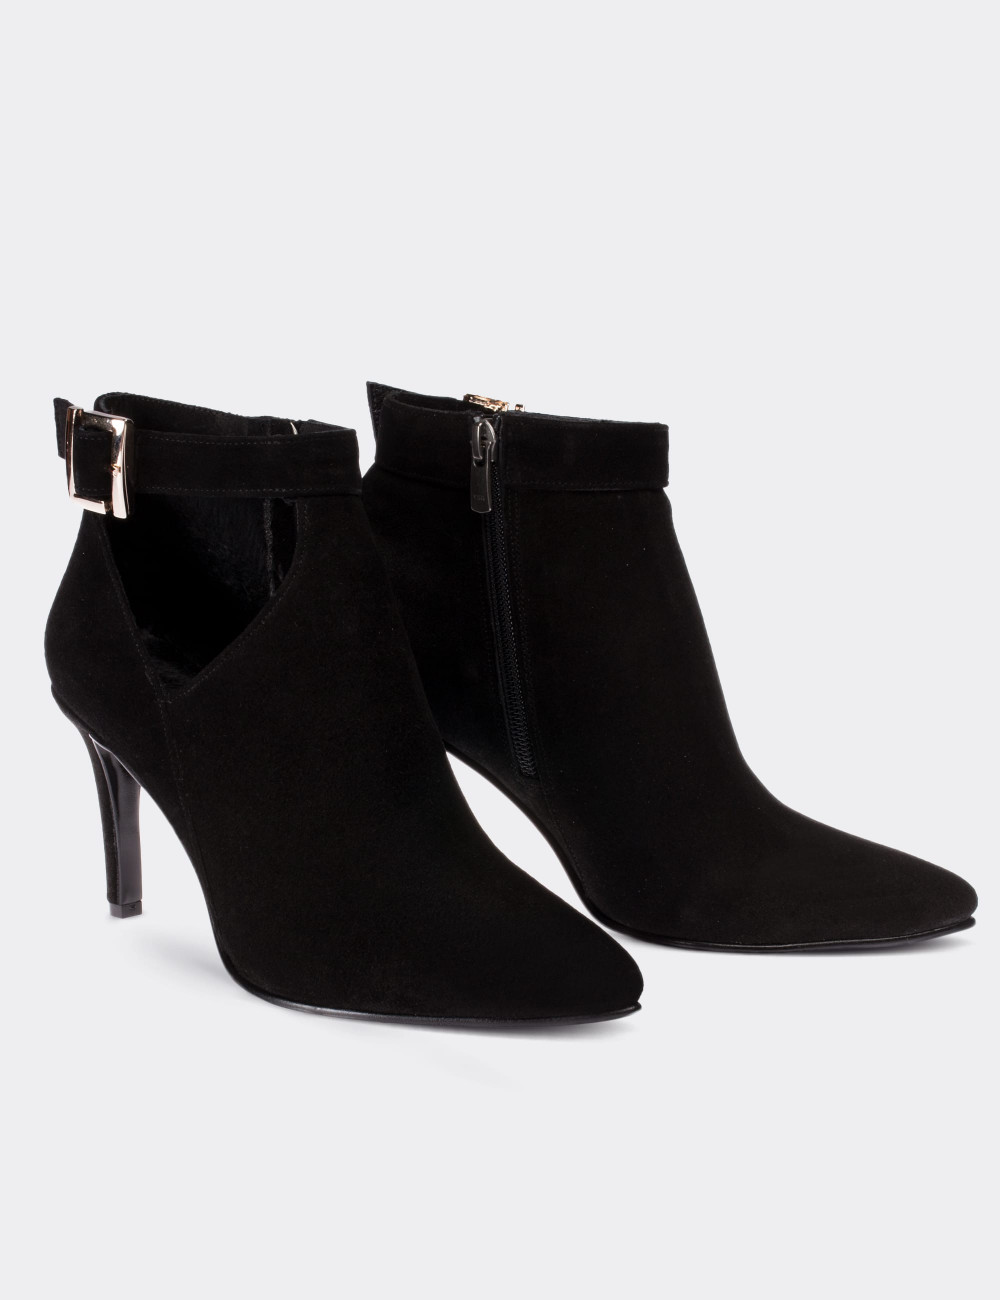 Black Suede Leather Boots - 02046ZSYHN01